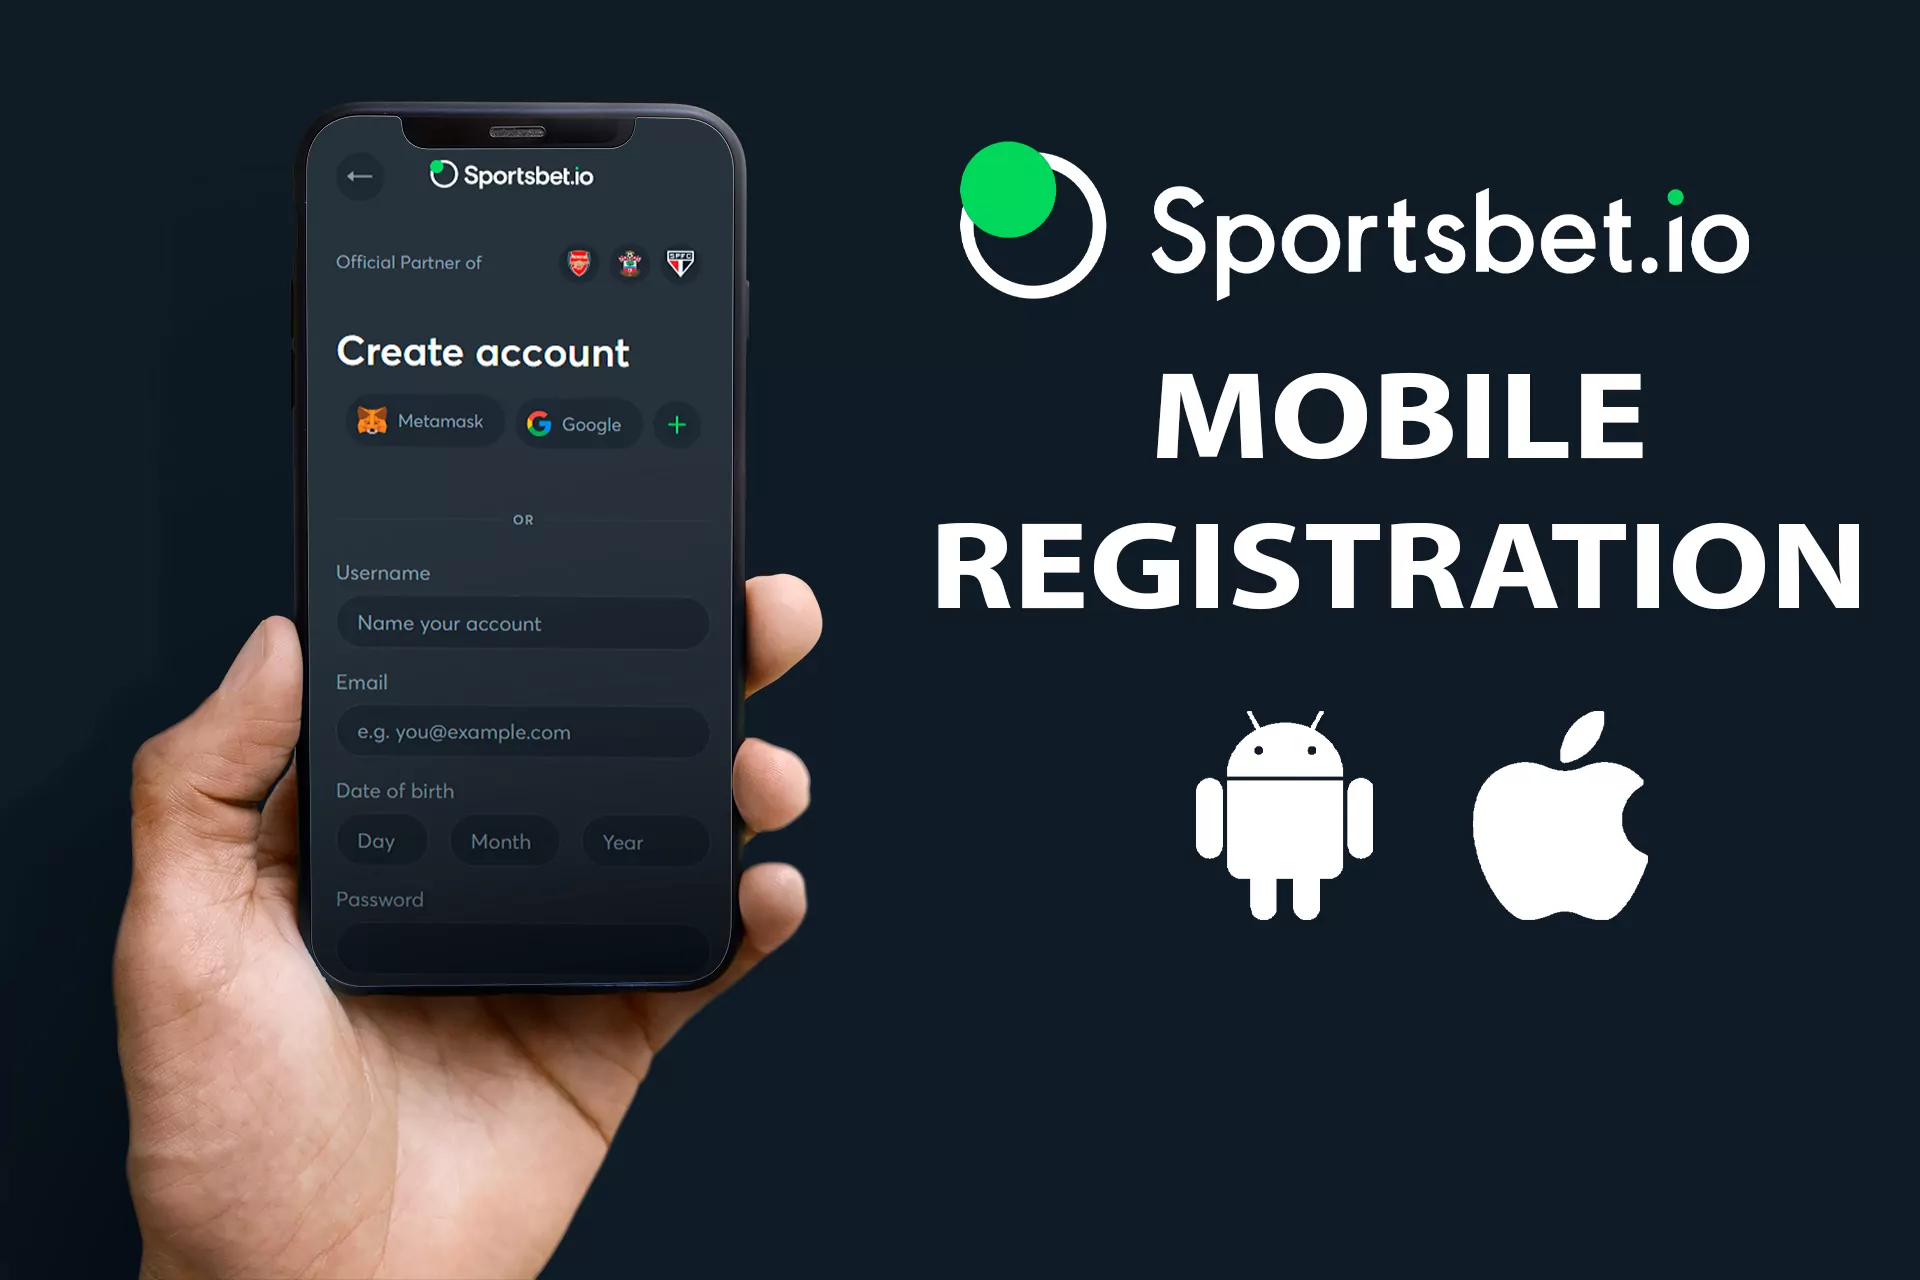 You can create an account at Sportsbet using your mobile phone.